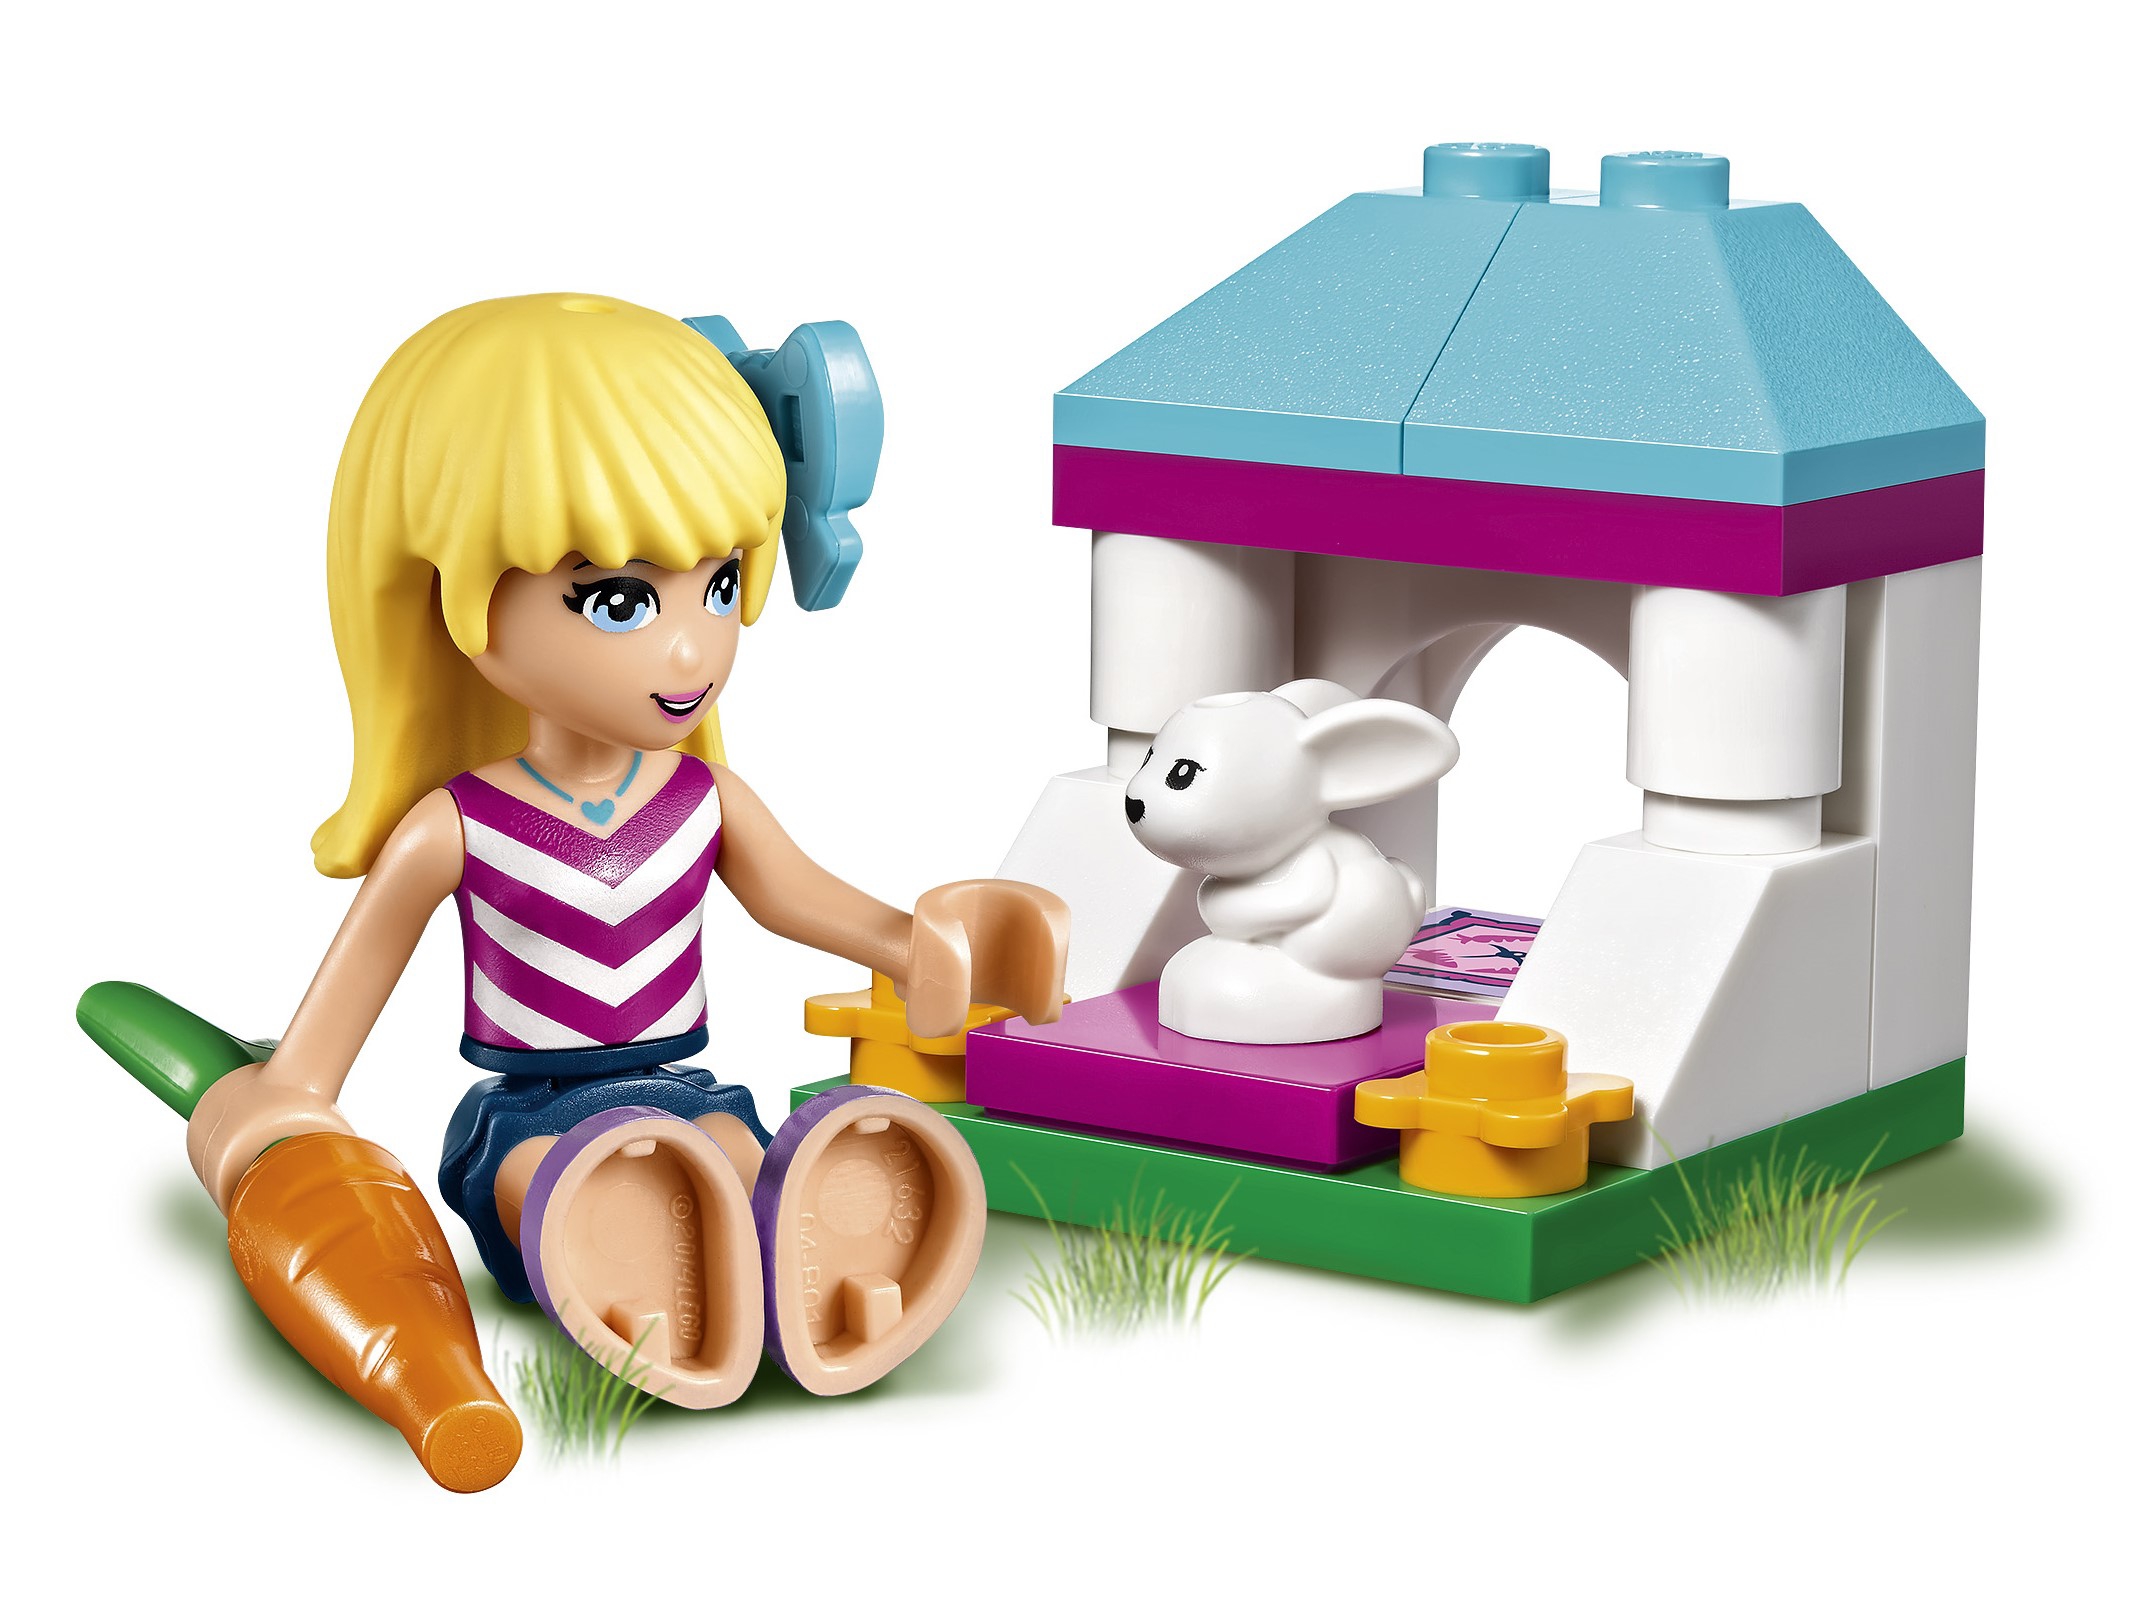 Stephanie's House 41314 | Friends Buy online at the Official LEGO® US